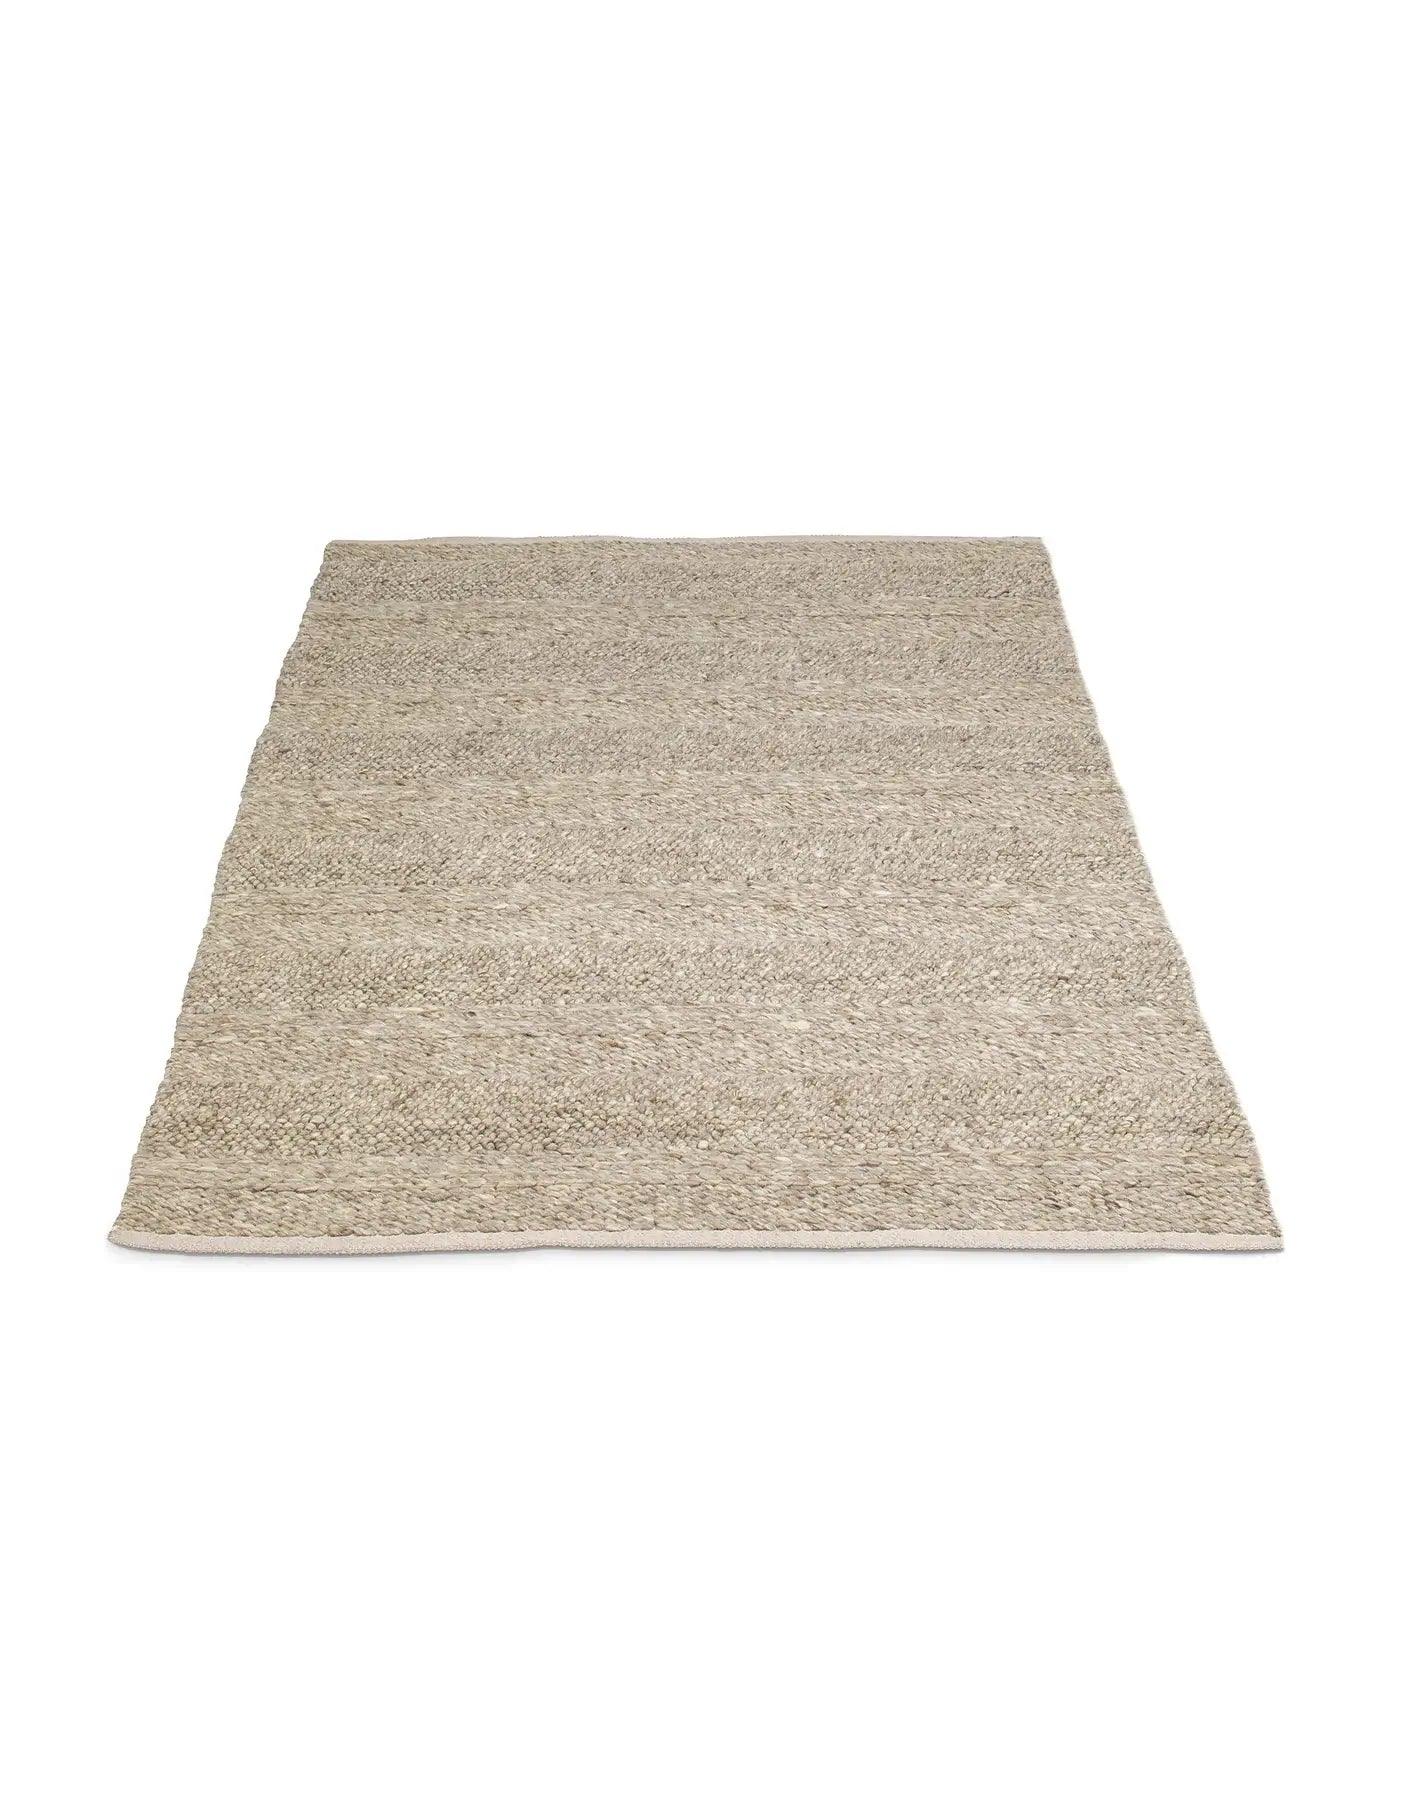 Hand-woven Textured Rug - Nature Home Decor